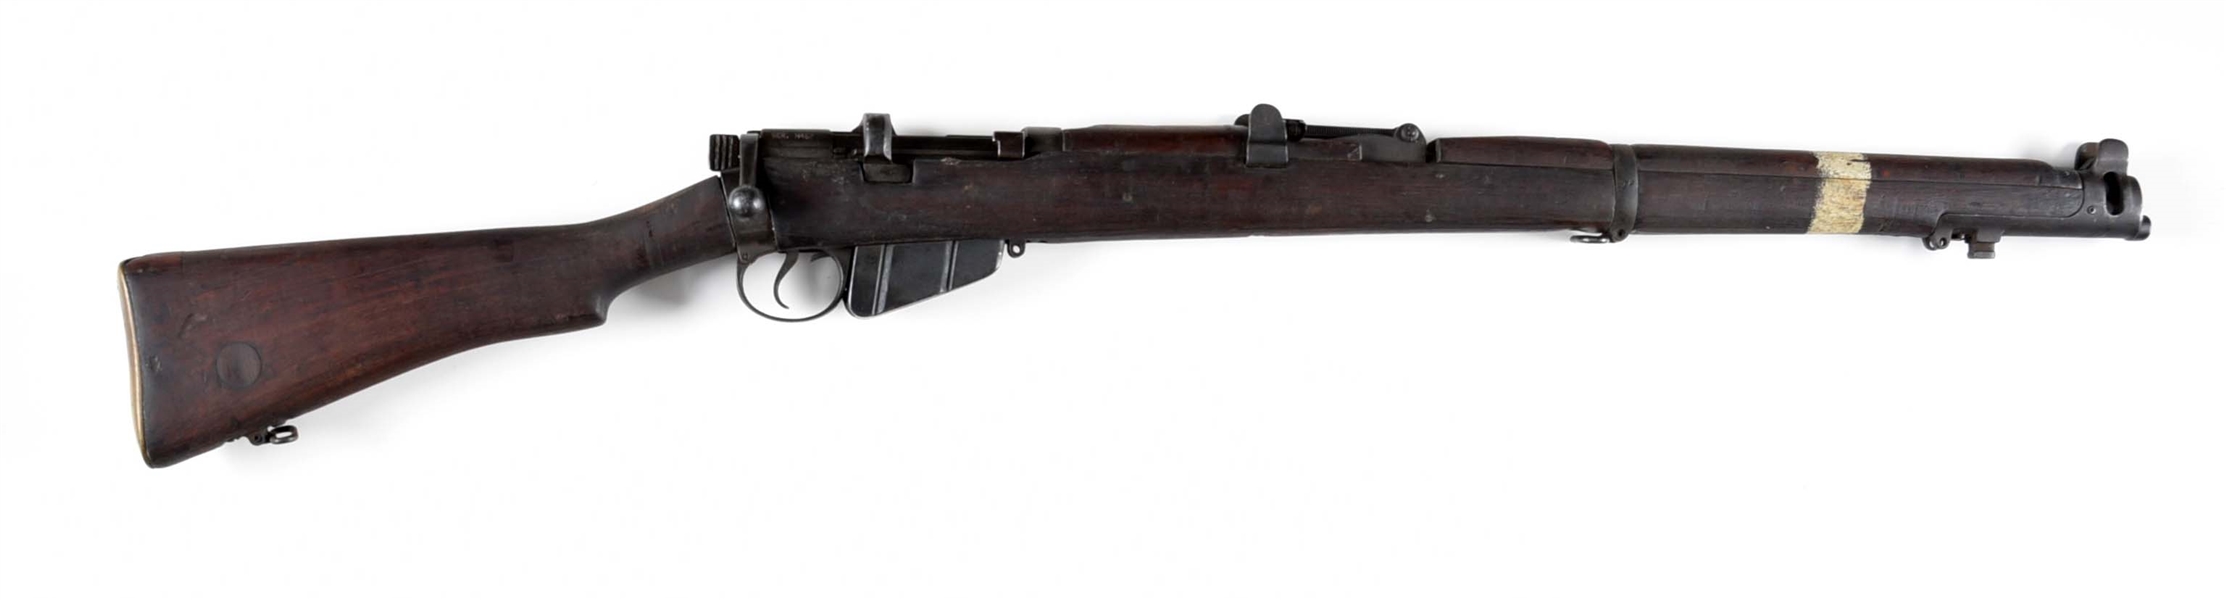 (C) INDIAN SMLE NO.1 MK III DRILL PURPOSE BOLT ACTION RIFLE. 